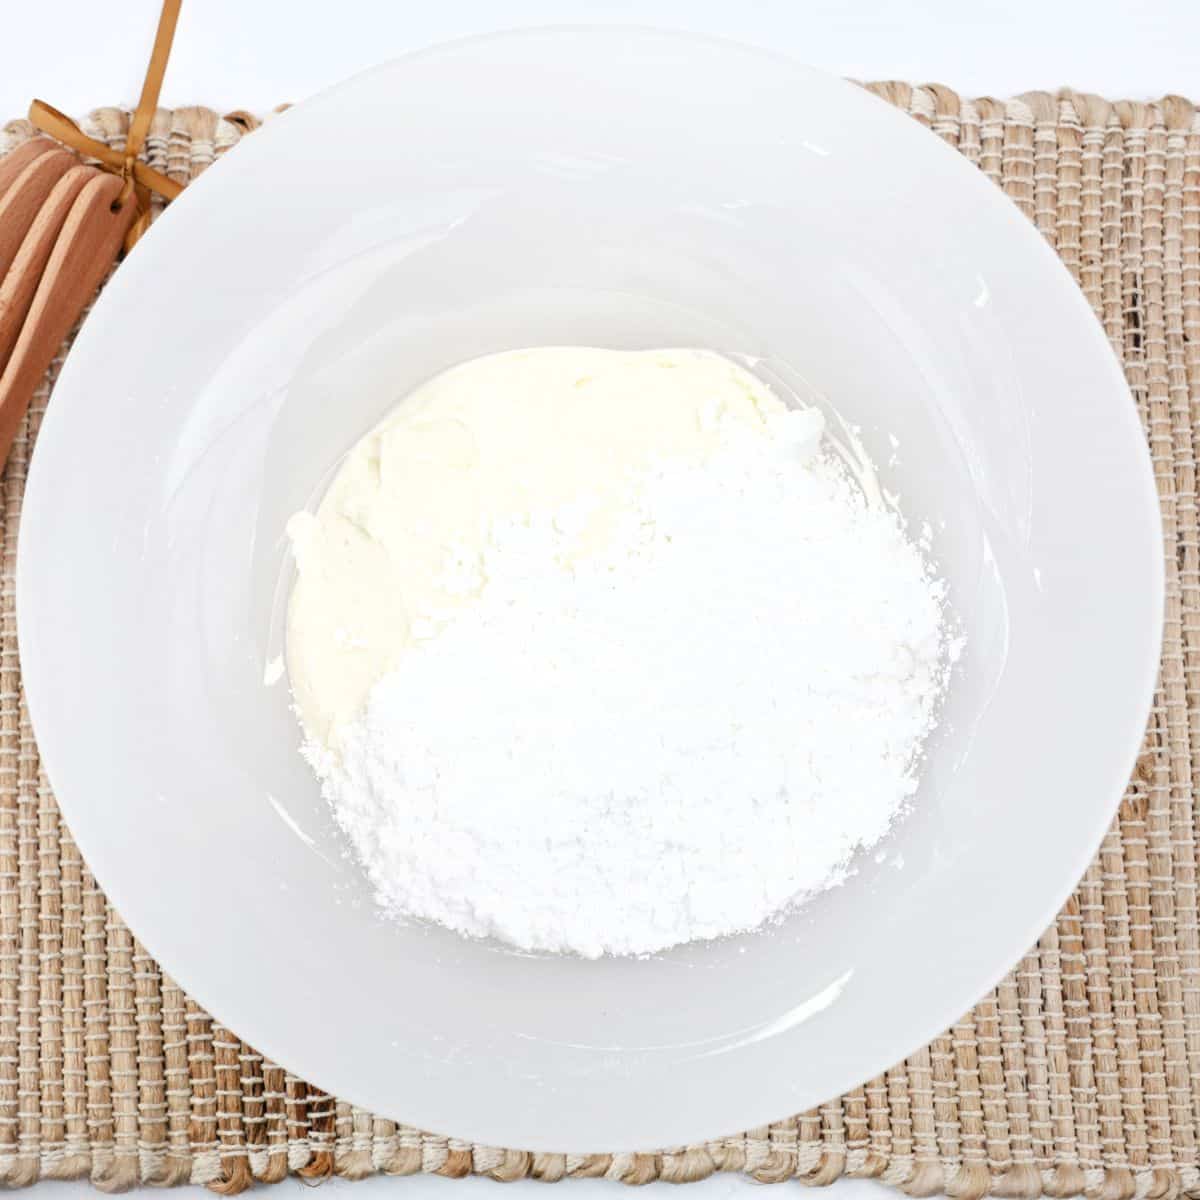 A mixing bowl with crea cheese blended with confectioners' sugar to make white chocolate bars.